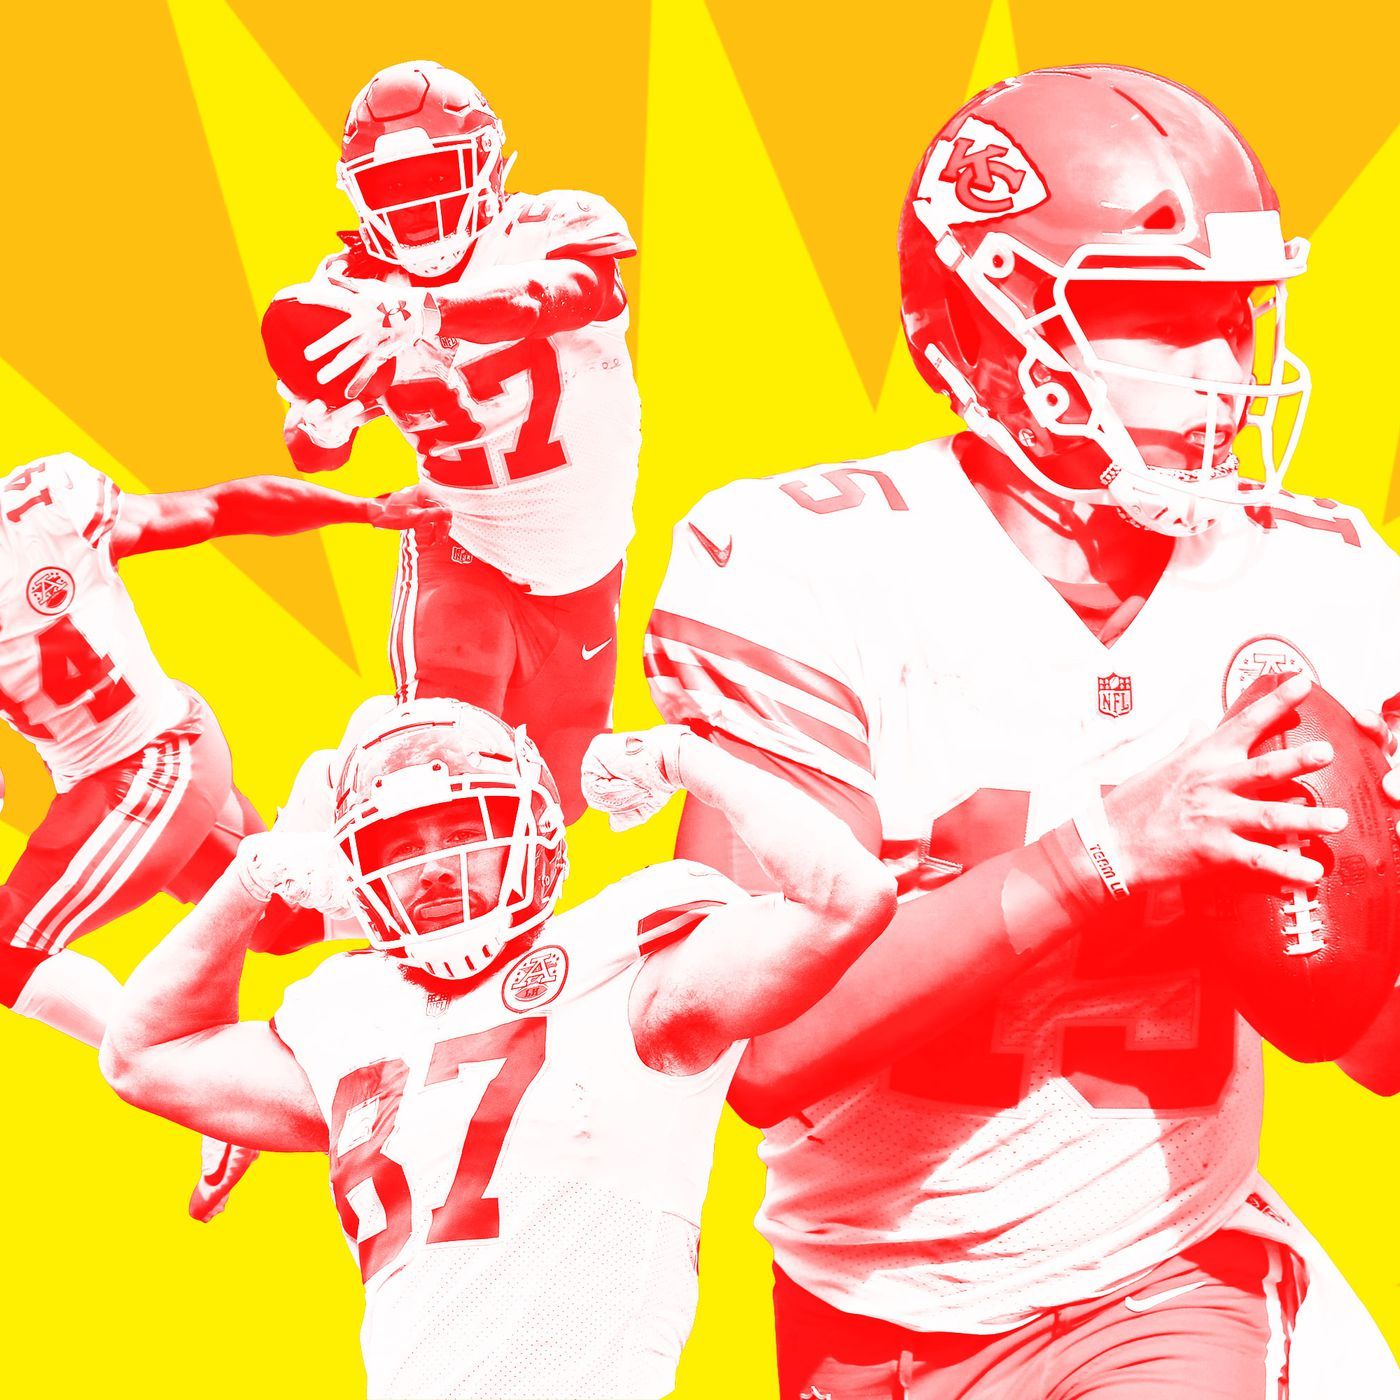 Patrick Mahomes II and the Chiefs Are the New Greatest Show on Turf